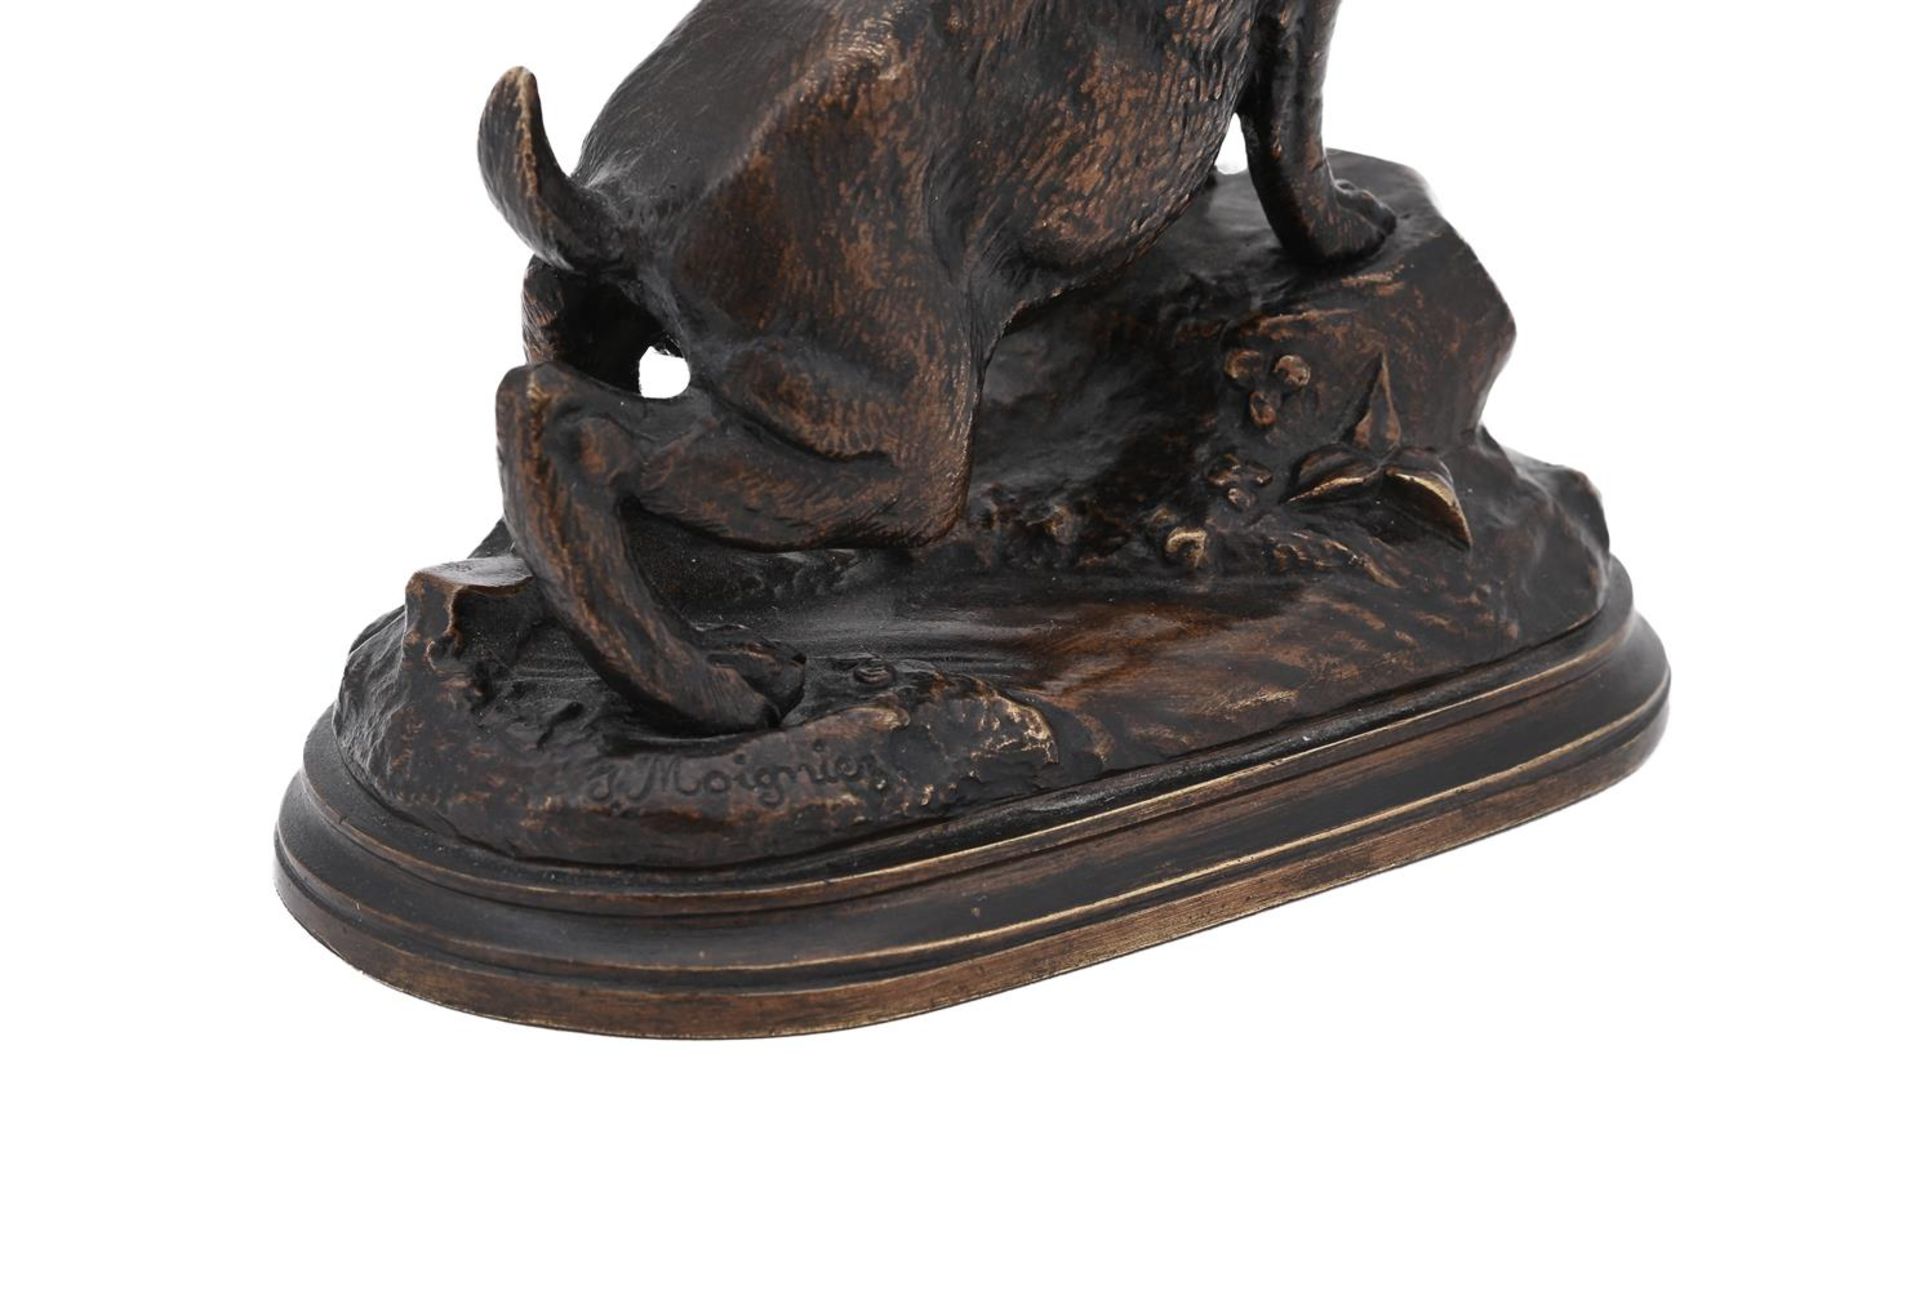 JULES MOIGNIEZ (FRENCH, 1835-1894), A BRONZE MODEL OF AN ALERT HARE - Image 4 of 5